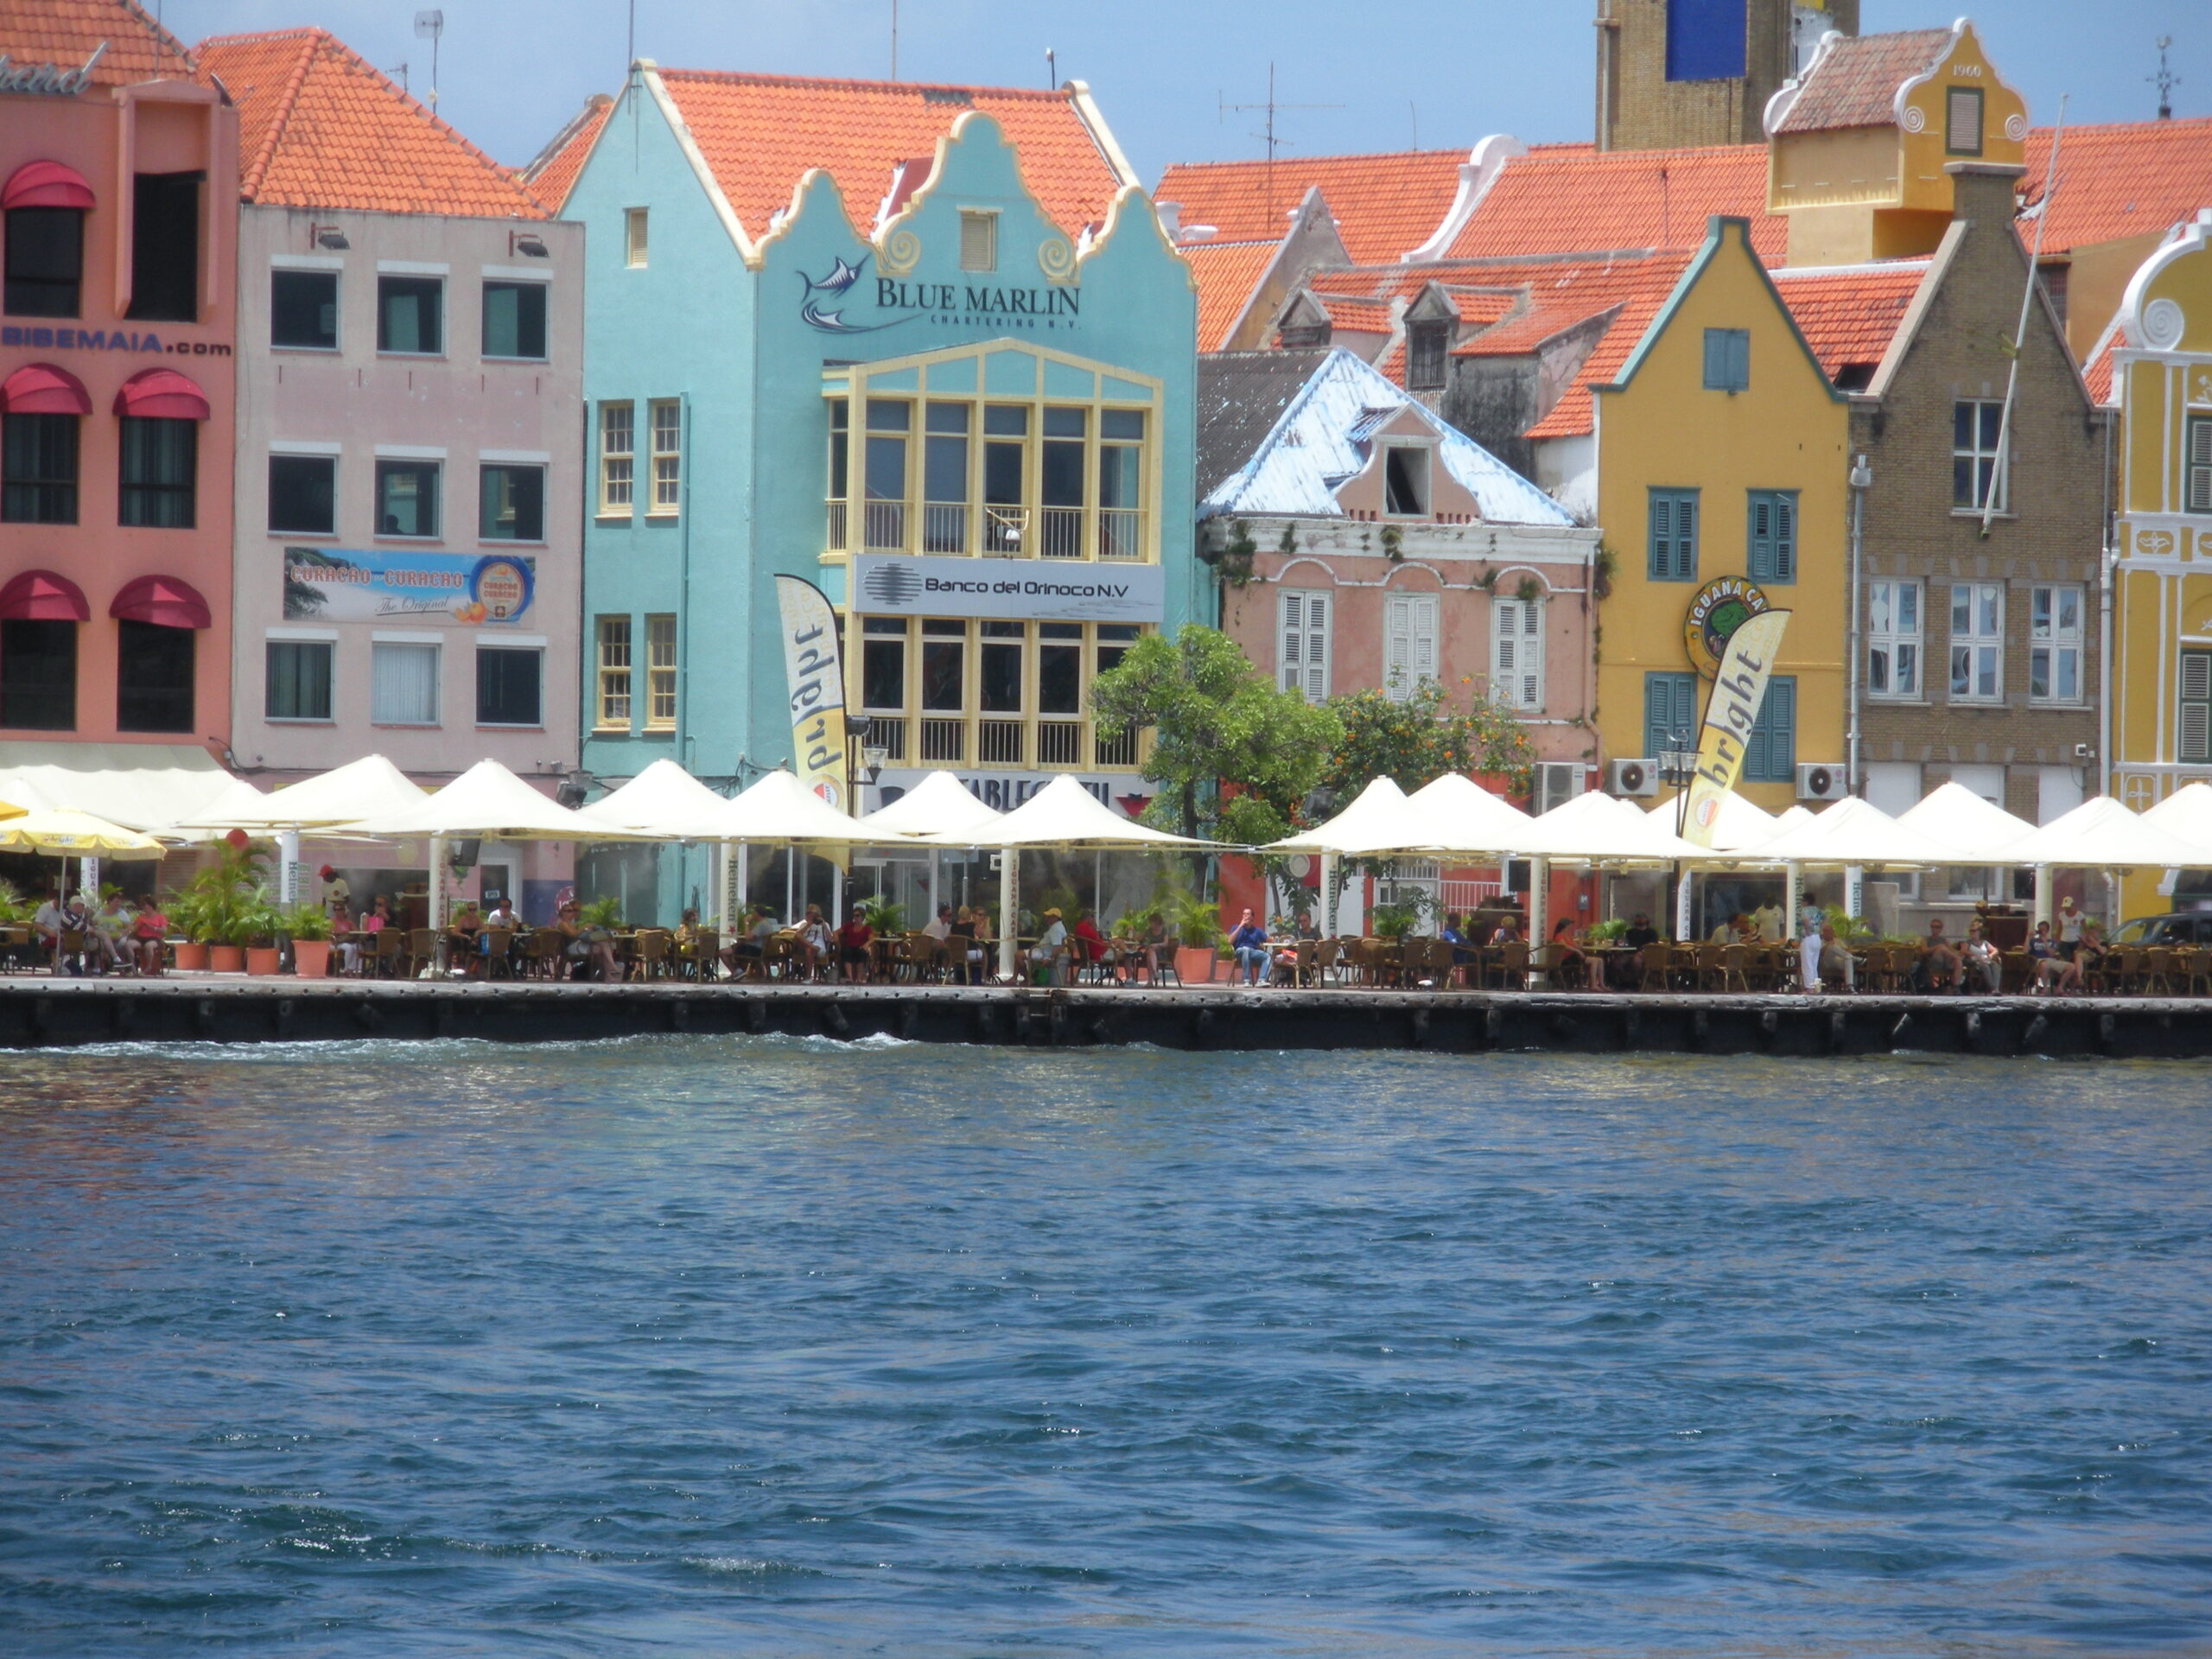 On The Waterfront in Curacao